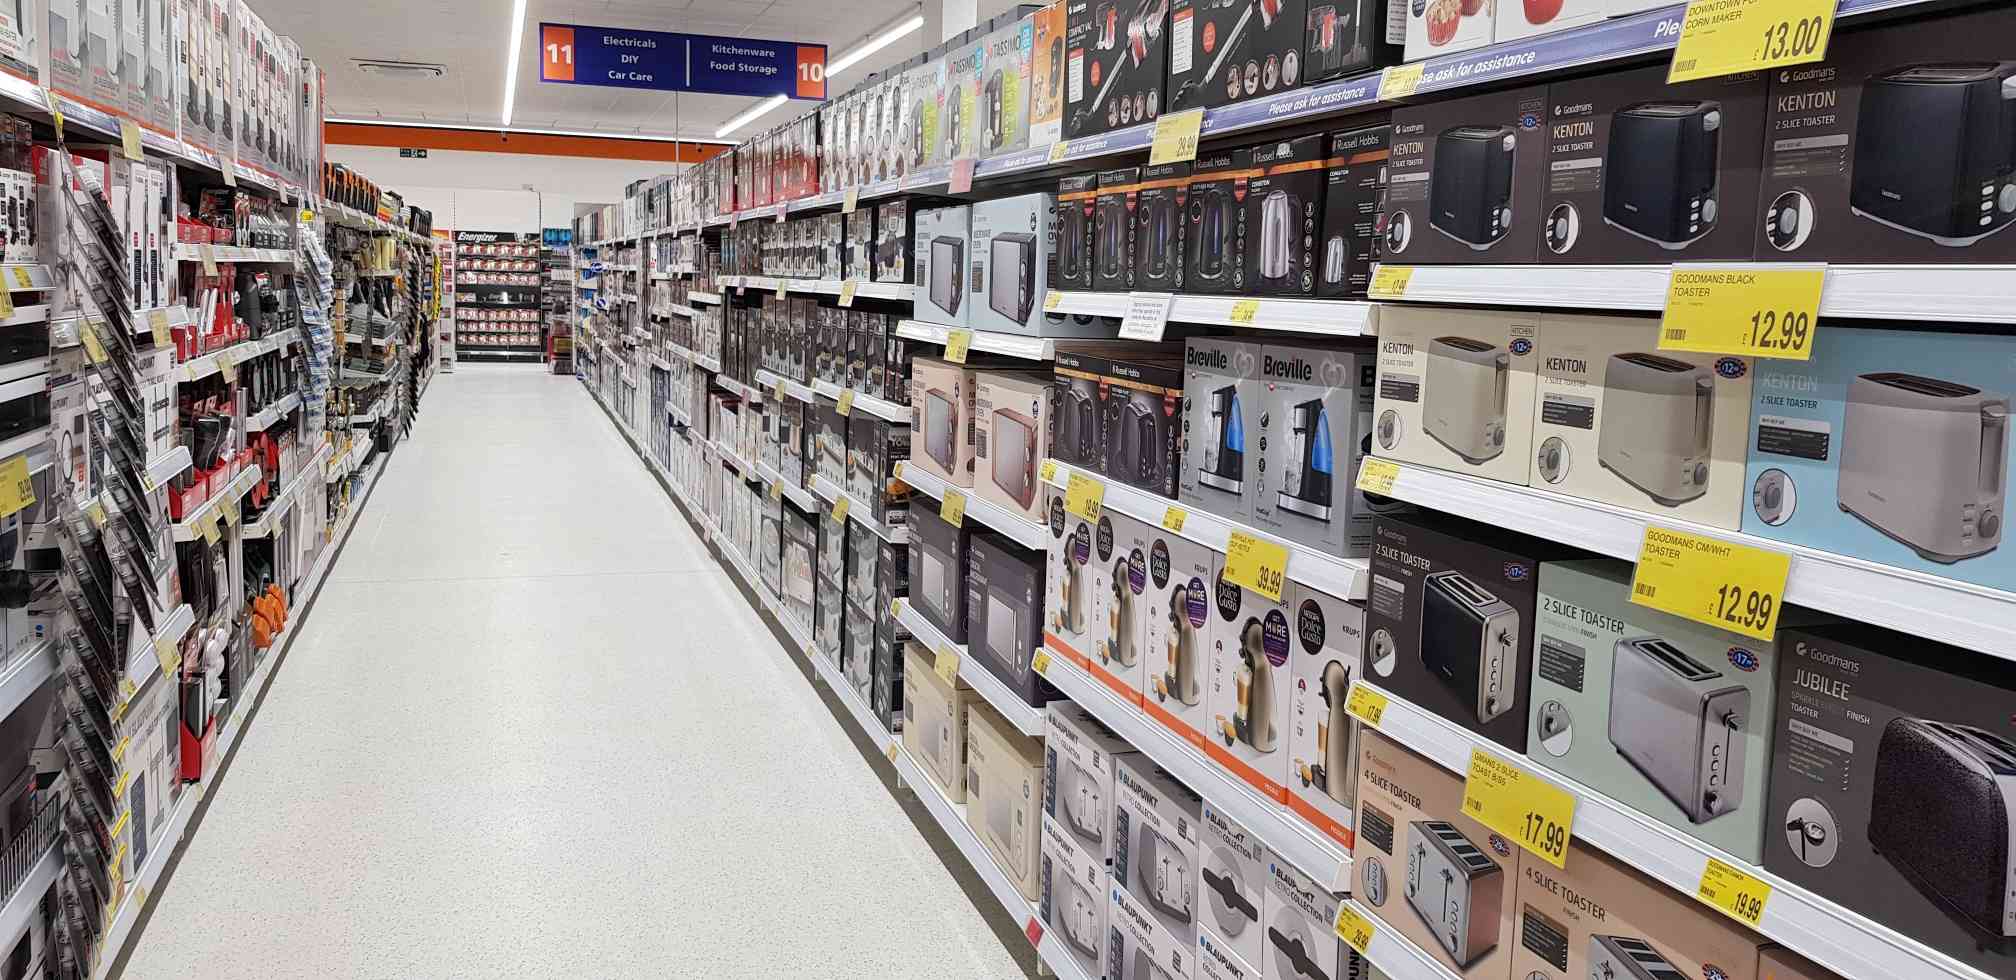 B&M's brand new store in Cowdenbeath stocks a great range of electrical items for the home, including TVs, Bluetooth speakers, toasters, irons and much more.